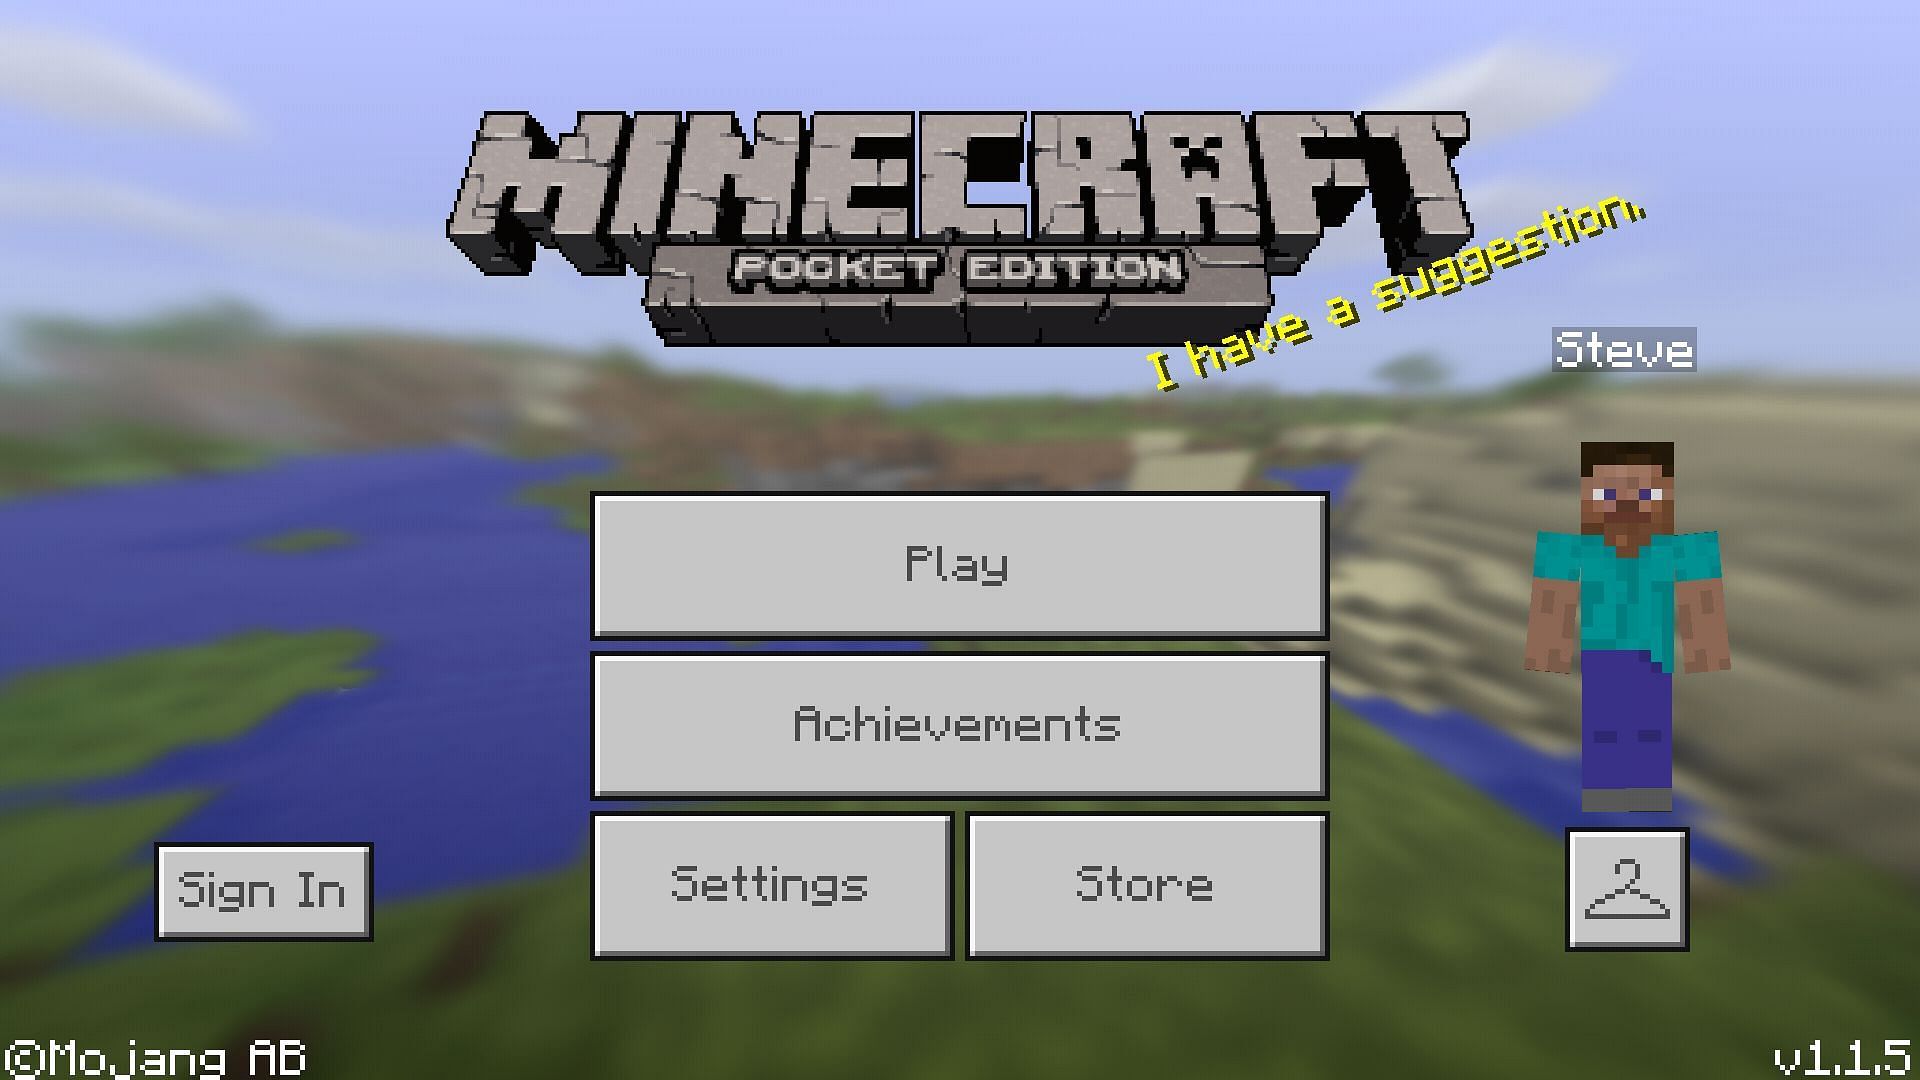 Even Pocket Edition has access to add-ons. (Image via Minecraft)